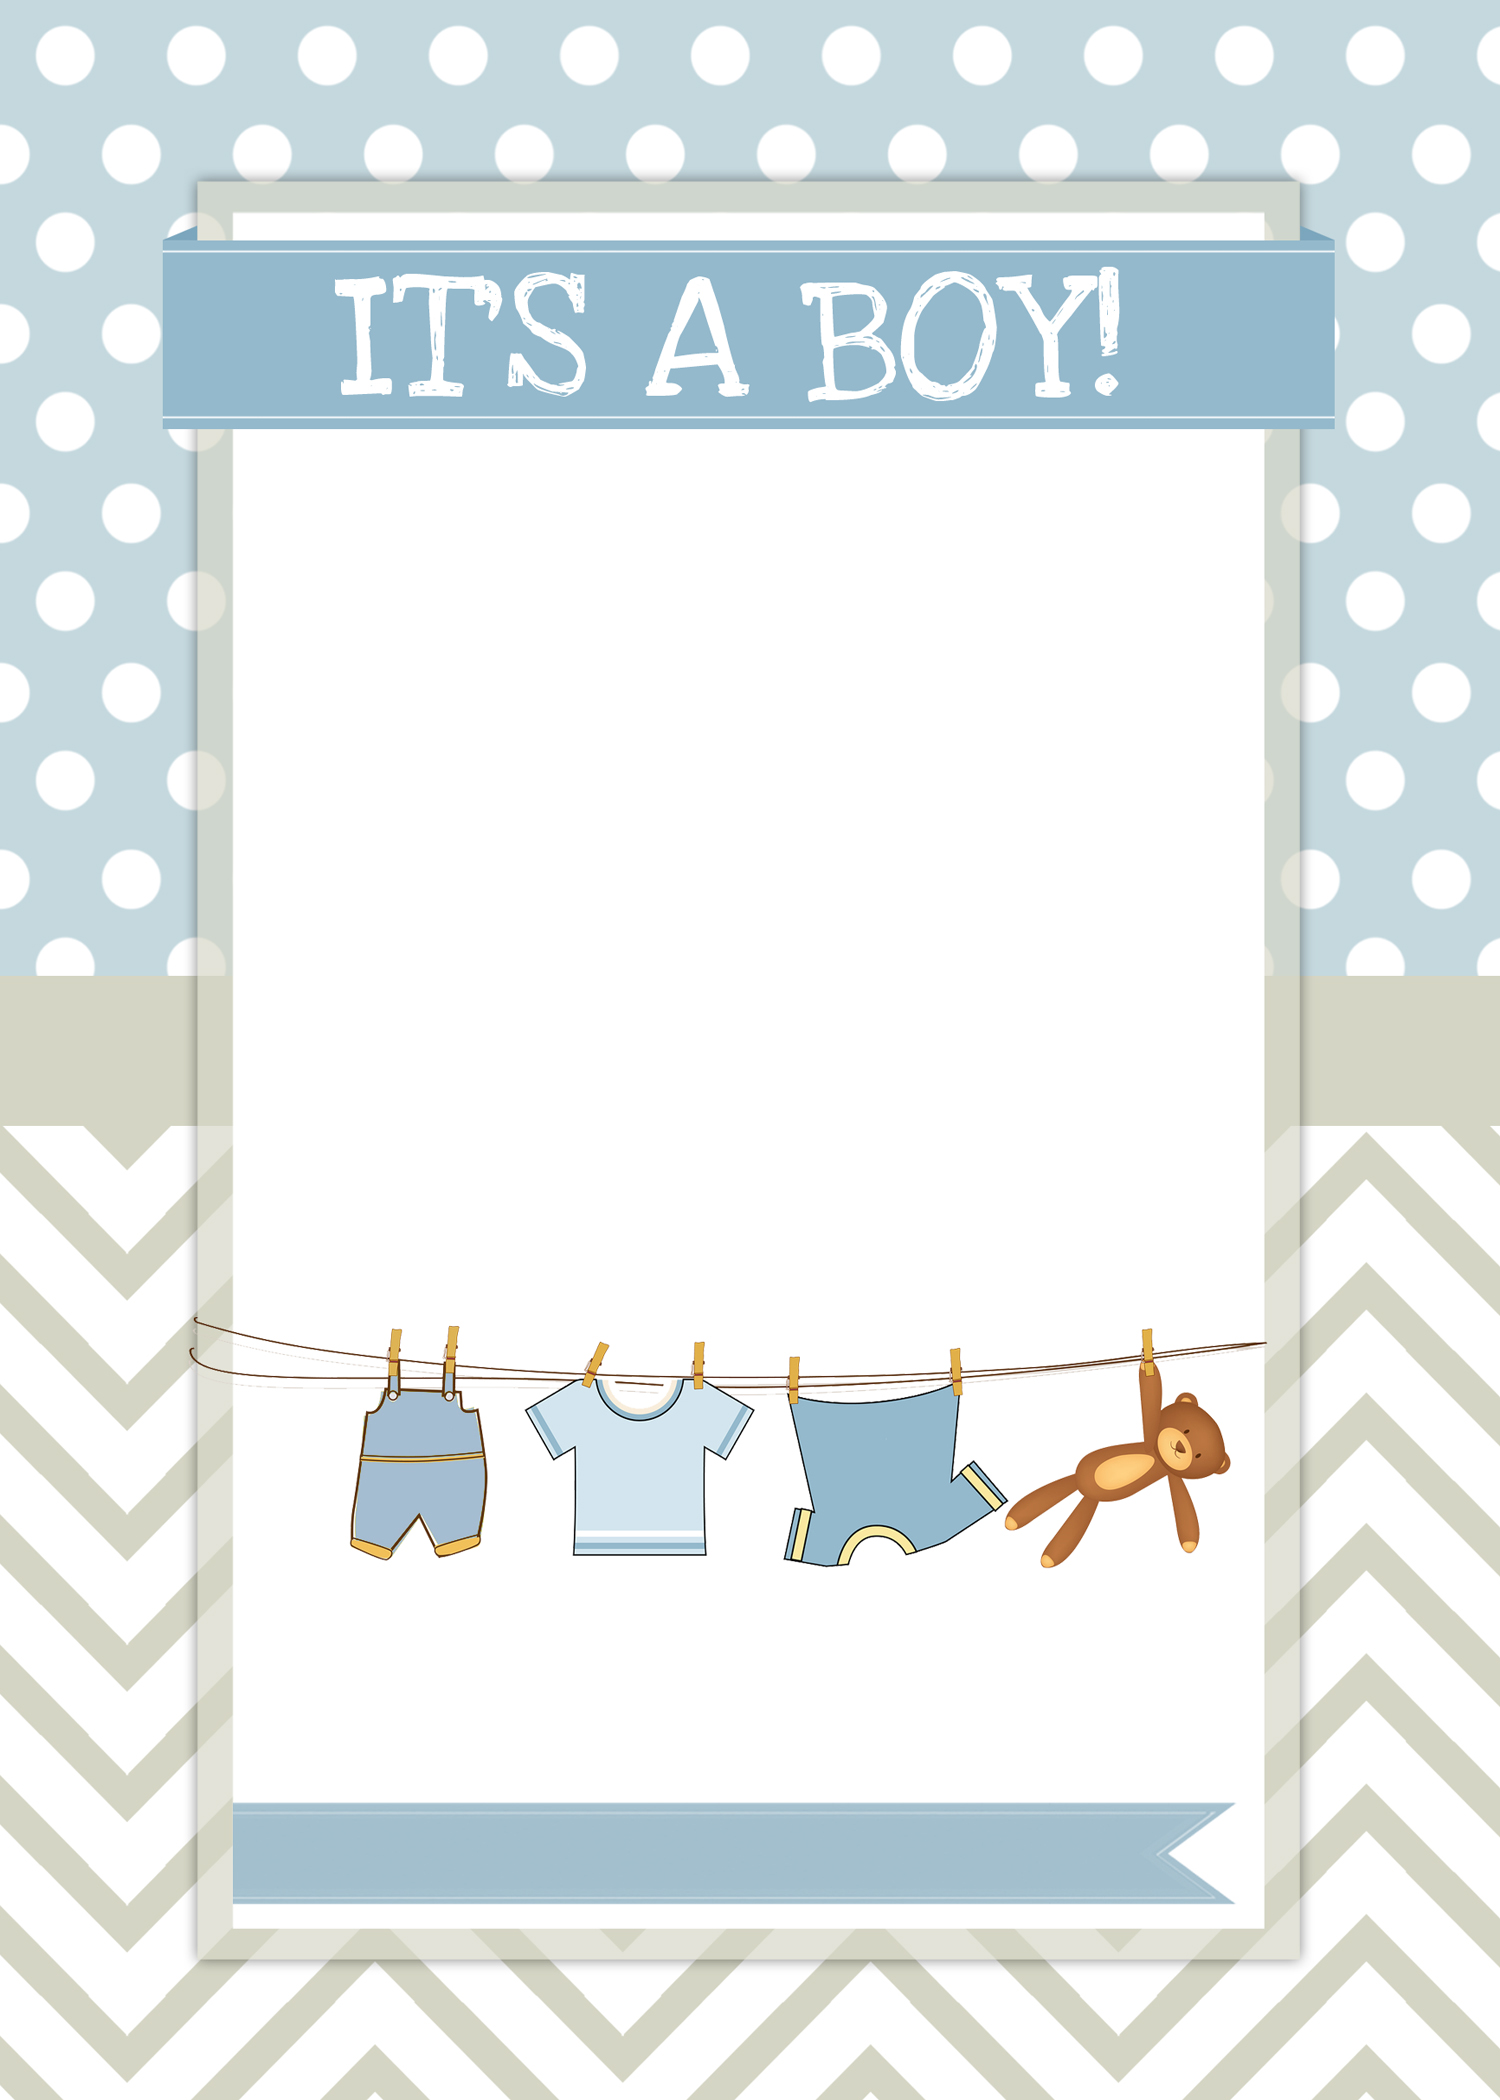 Free Baby Shower Images Boy, Download Free Clip Art, Free.